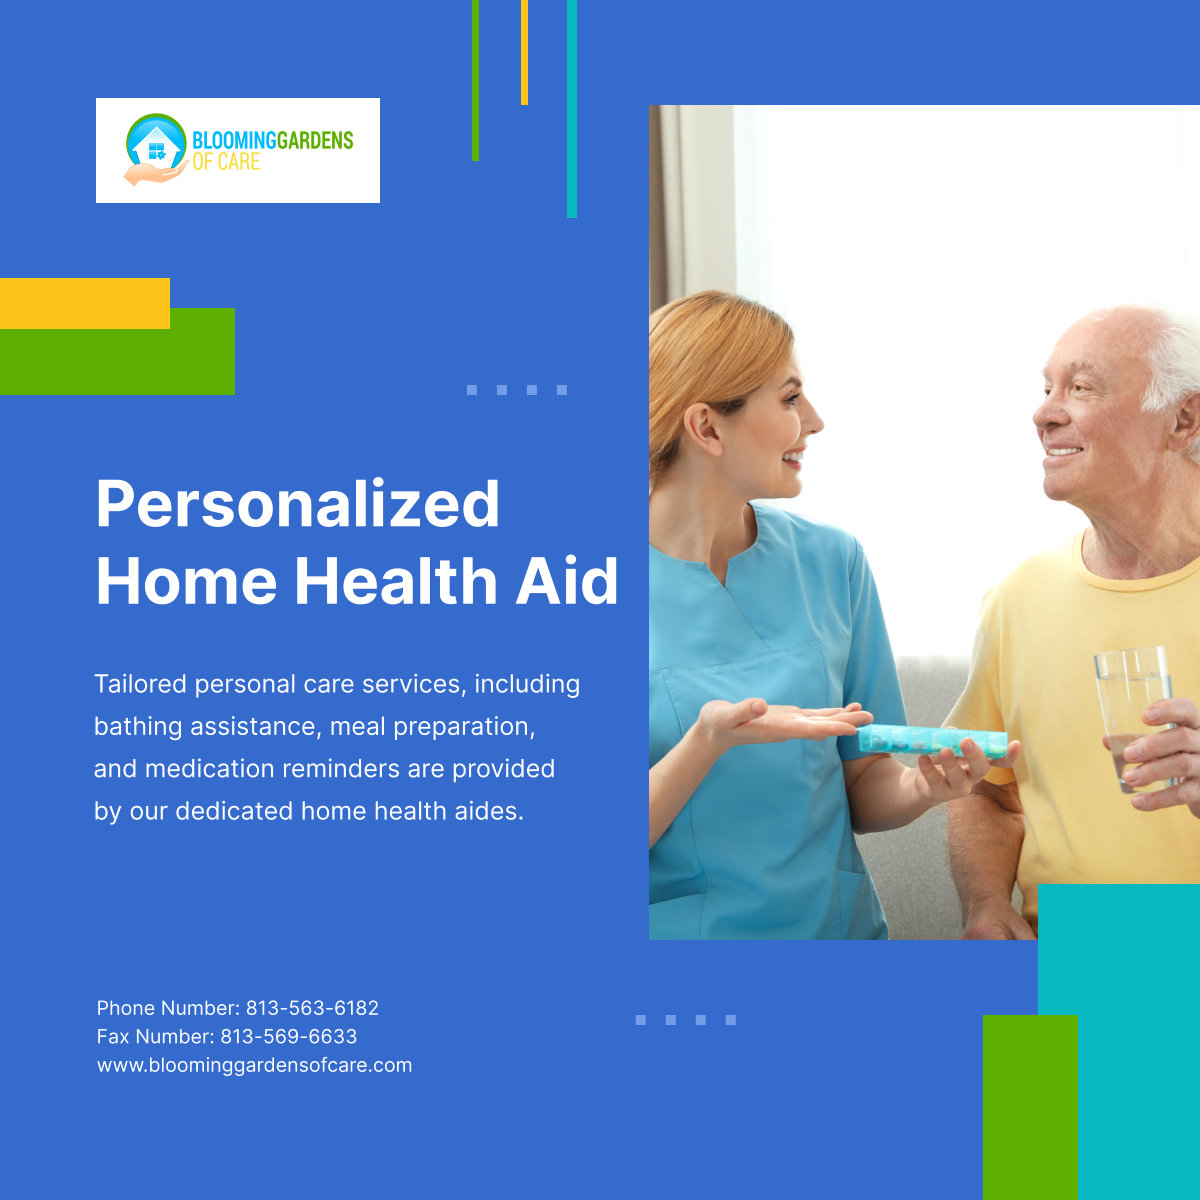 Experience personalized care tailored to your needs by our Home Health Aides. Contact us today for compassionate assistance. 

#TampaFL #HomeHealthcare #PersonalizedCare